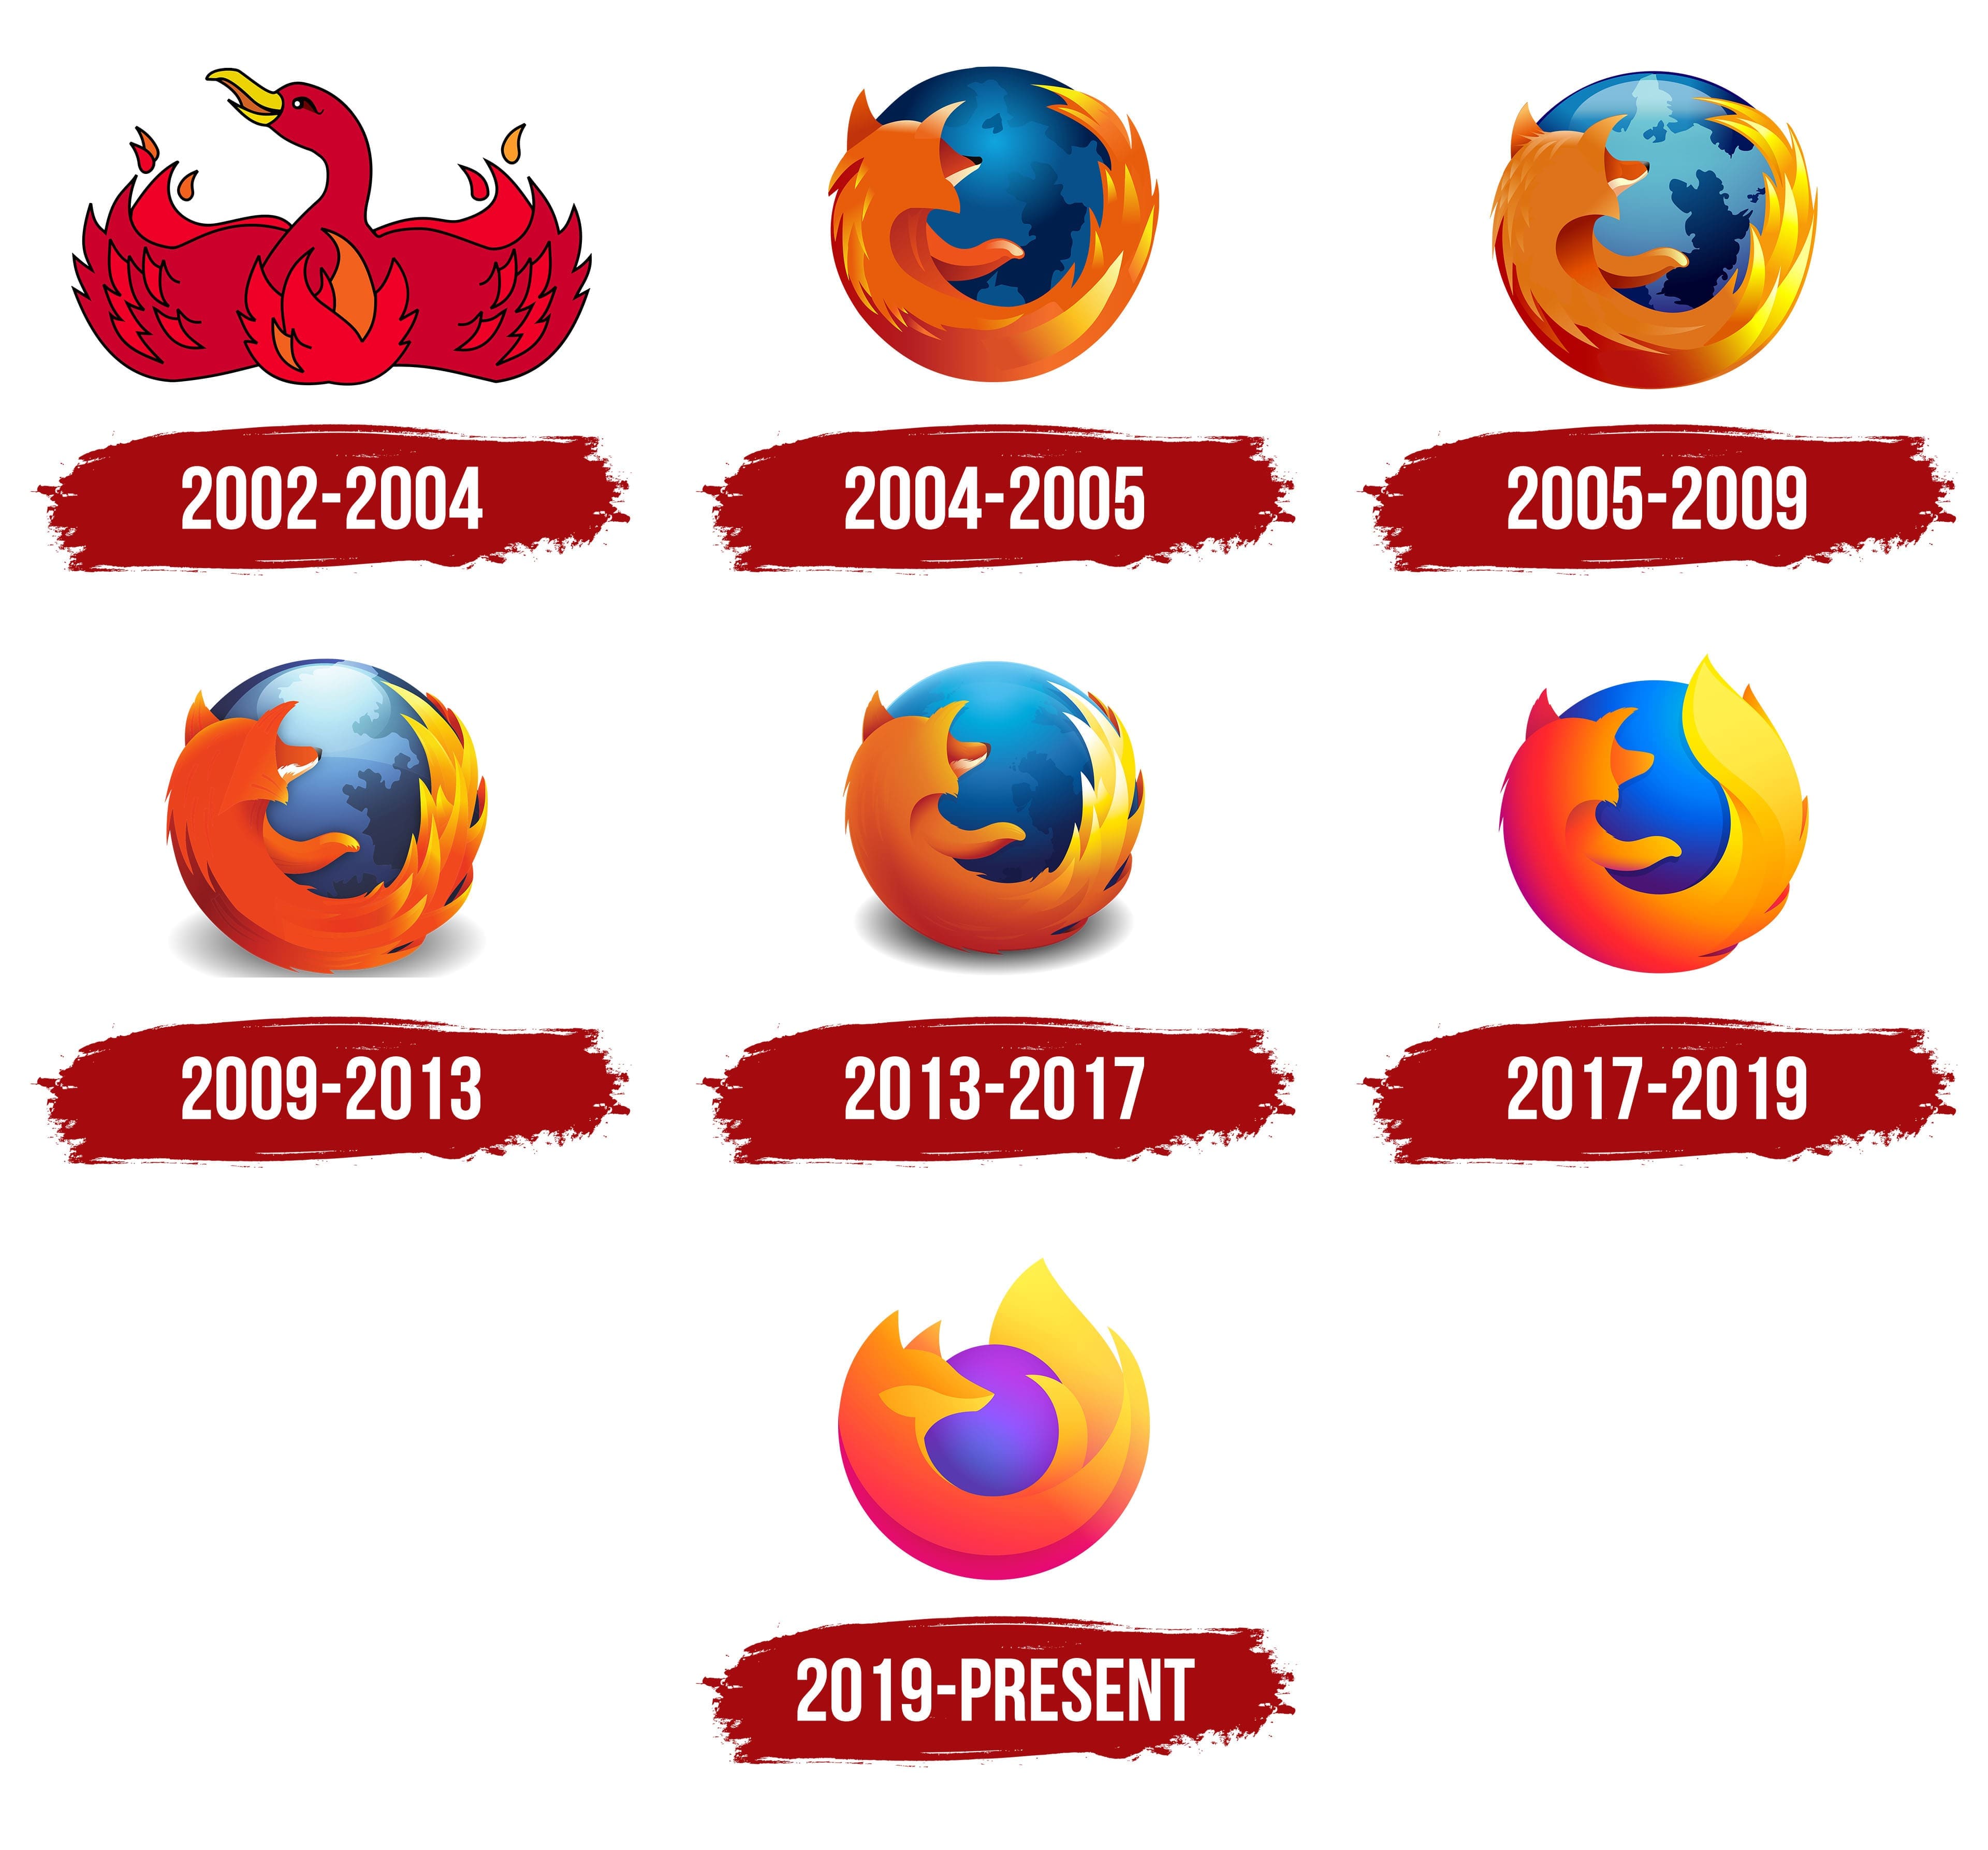 firefox dark theme icon disappeared